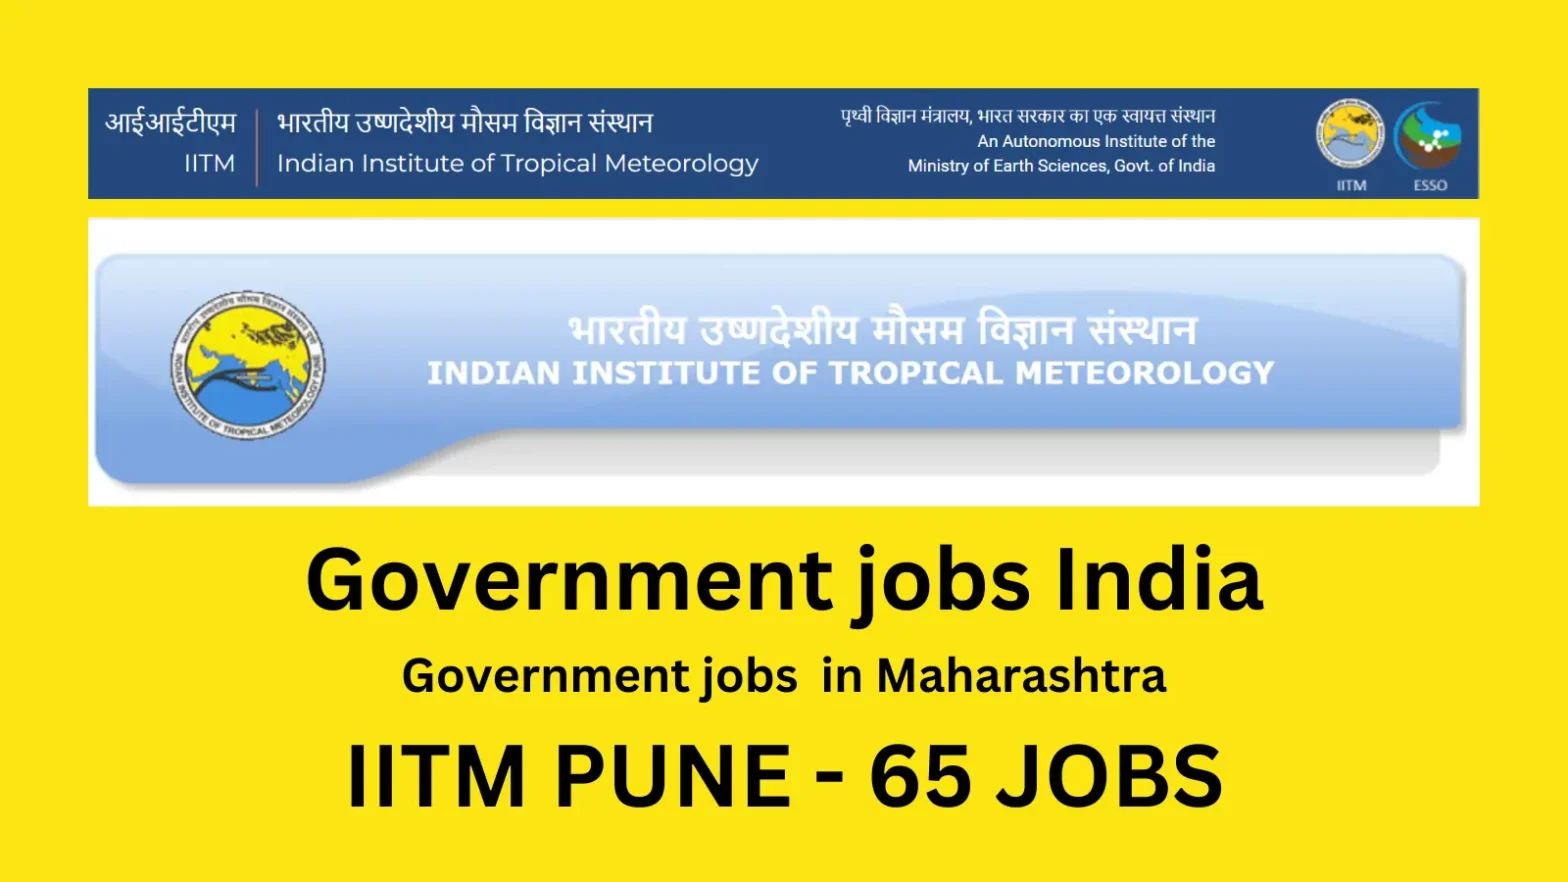 GOVERNMENT JOBS AFTER BSC